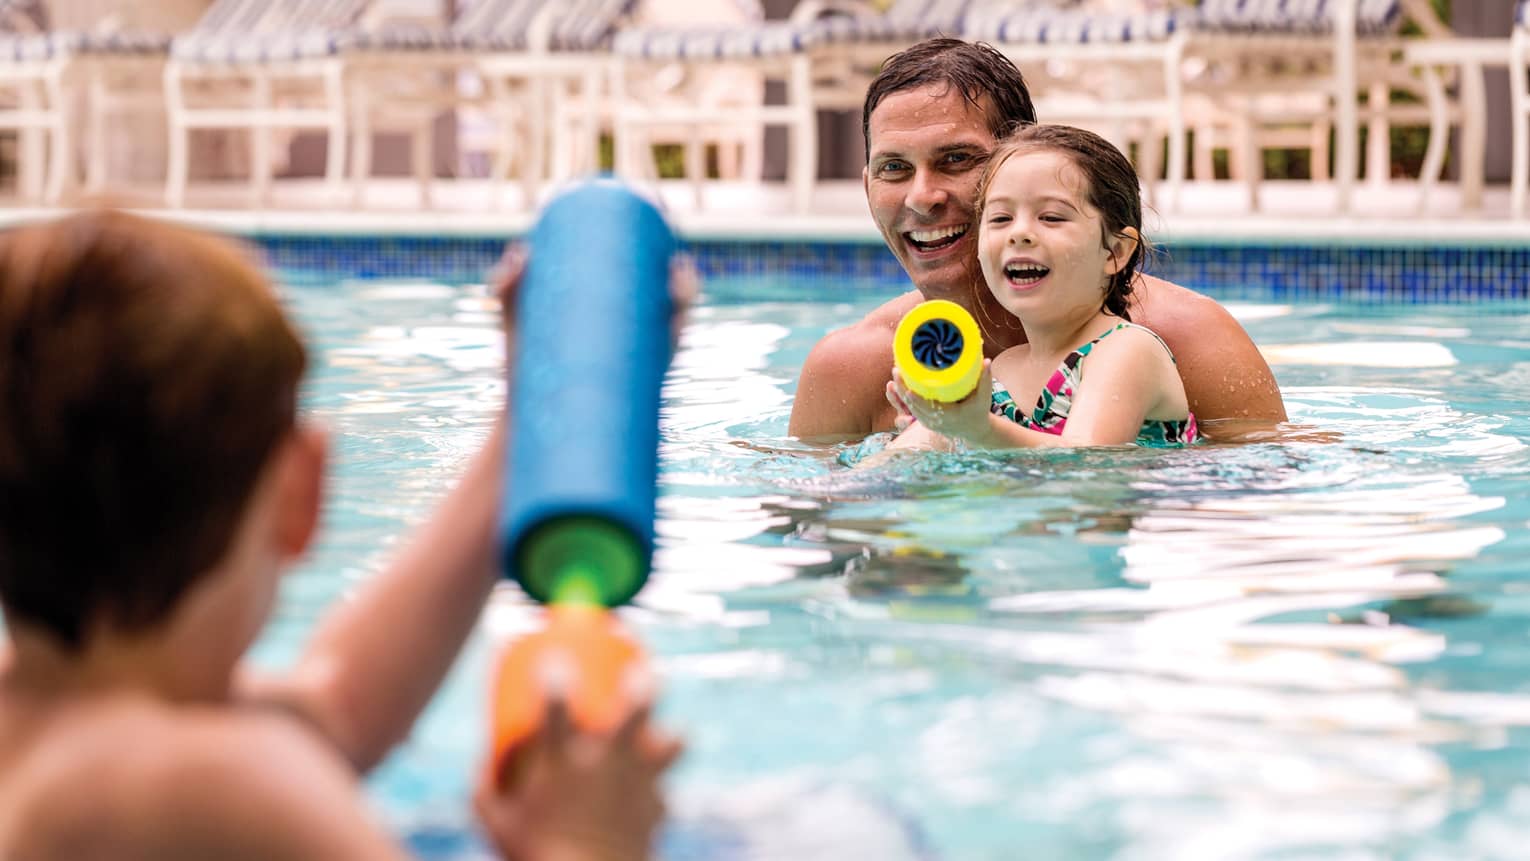 Smiling family swimming in outdoor pool squirt water guns at each other